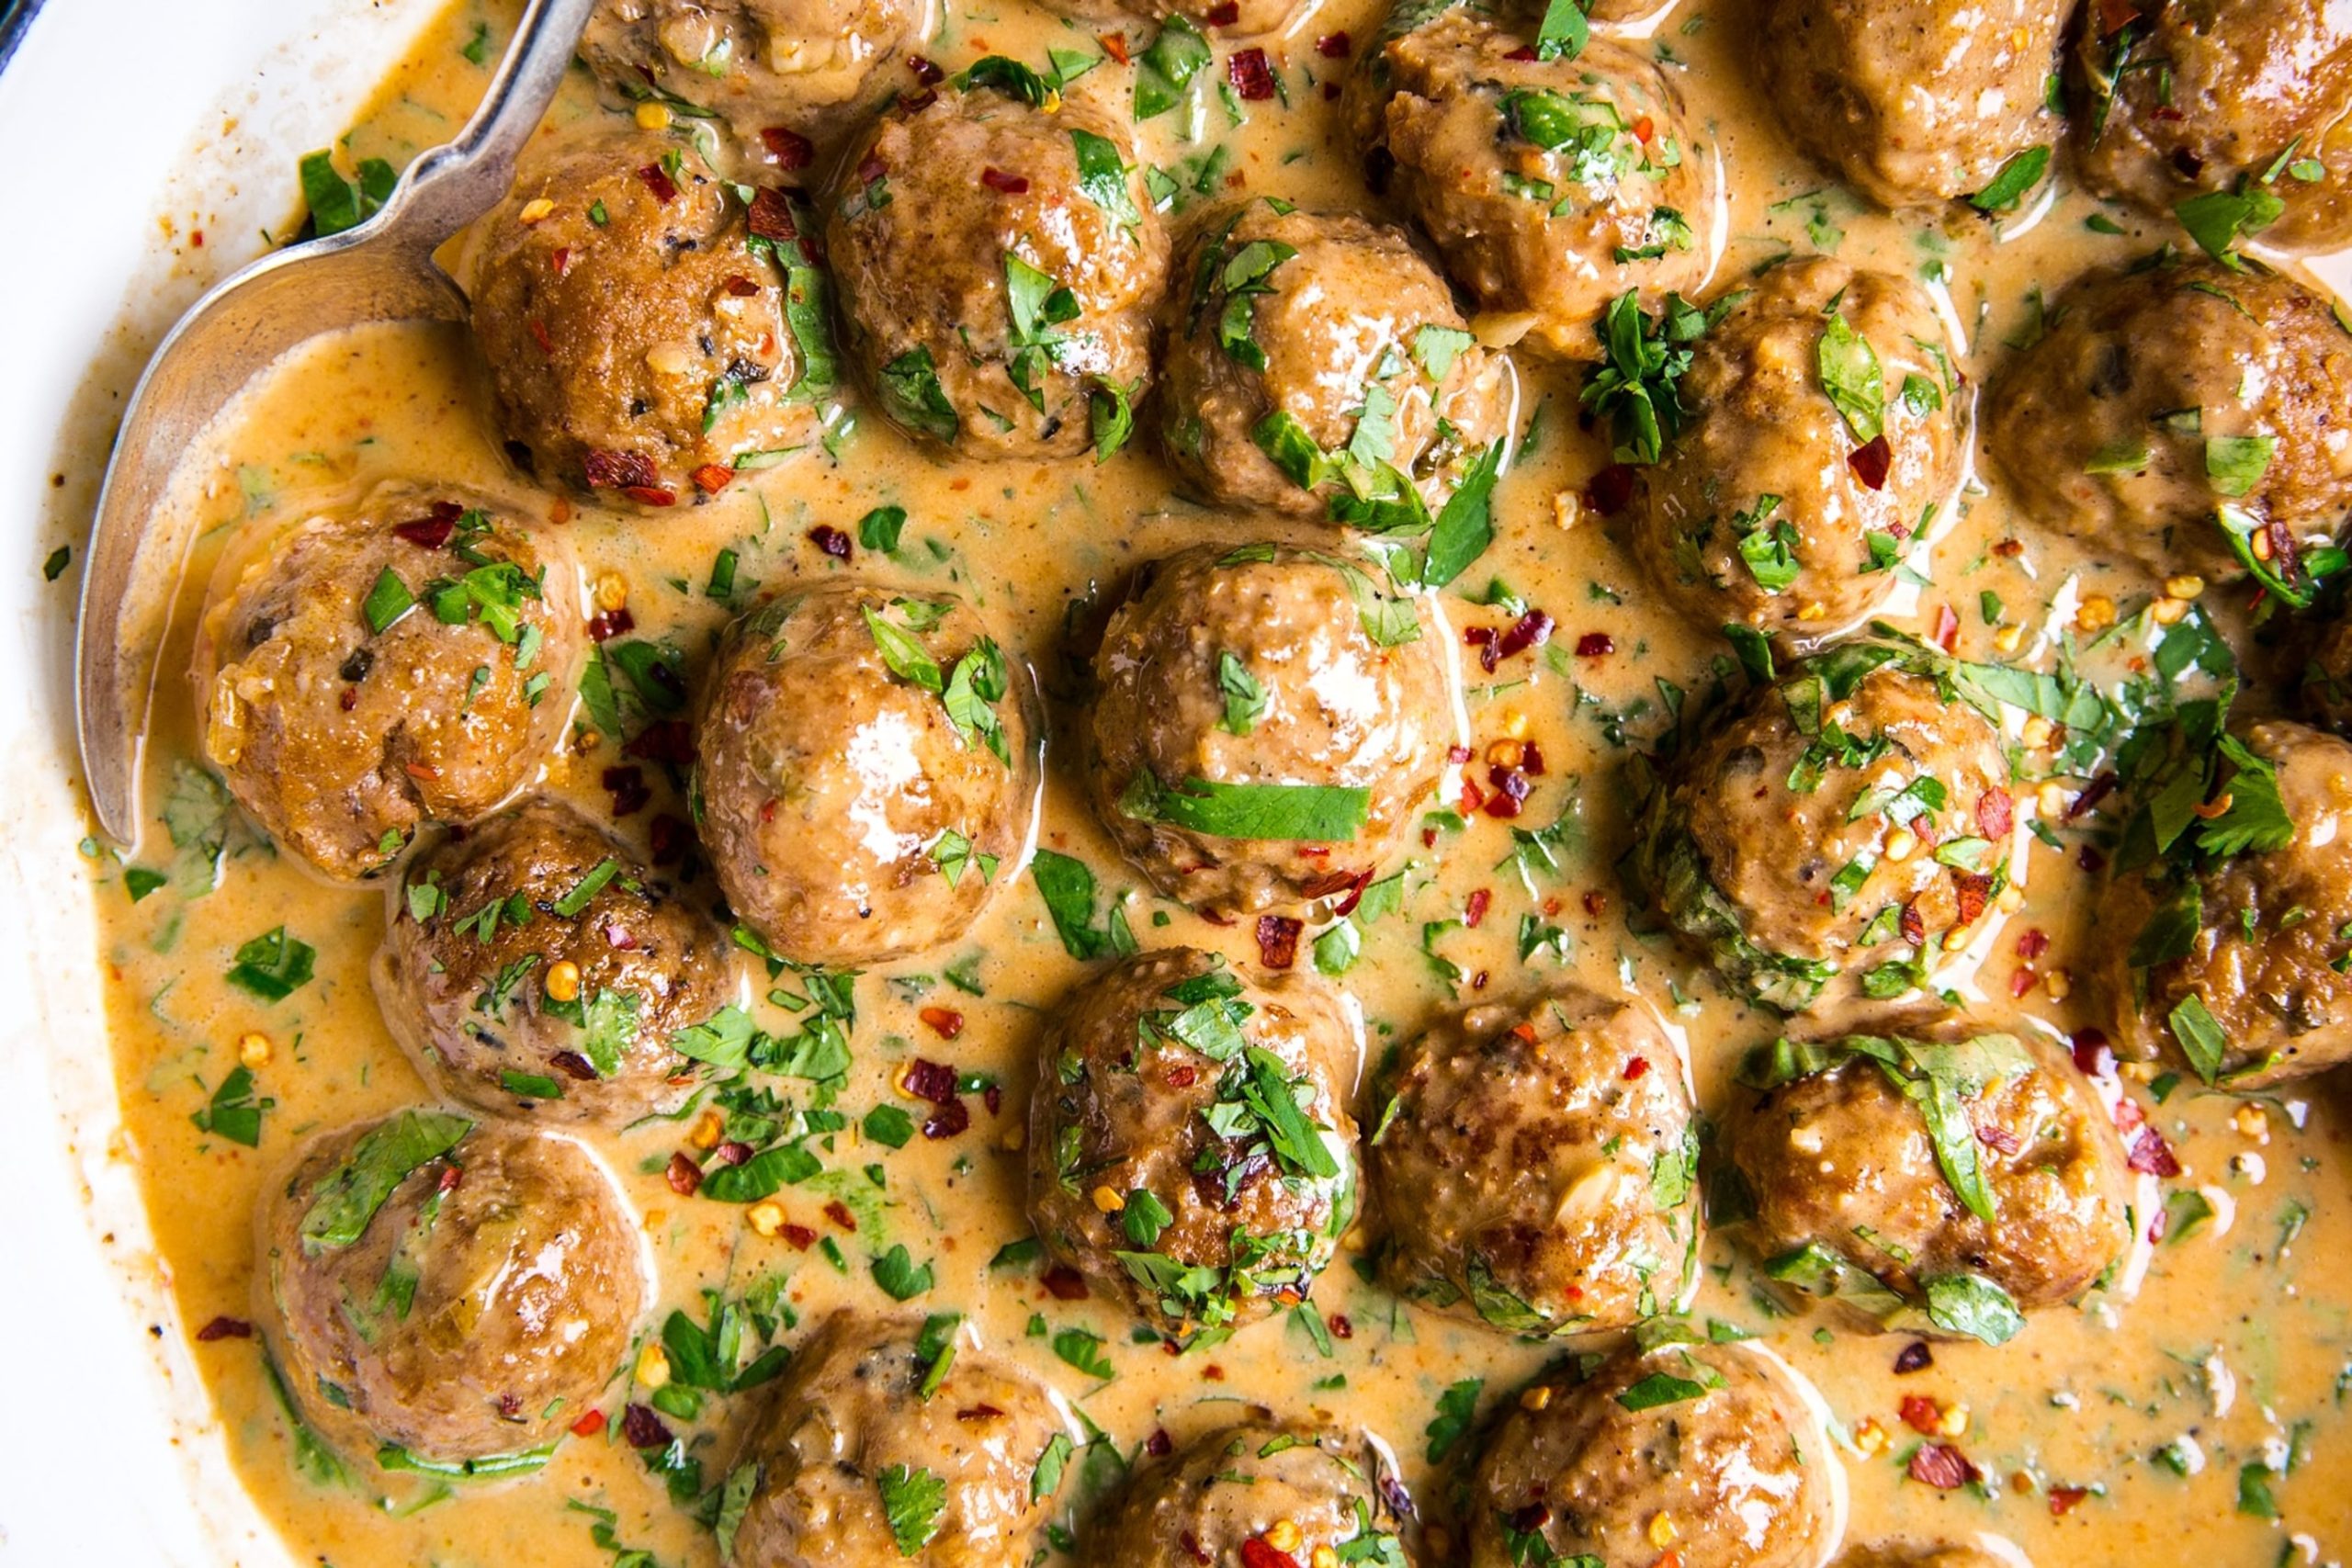 Turkey Meatballs in Curry Sauces Recipe Details